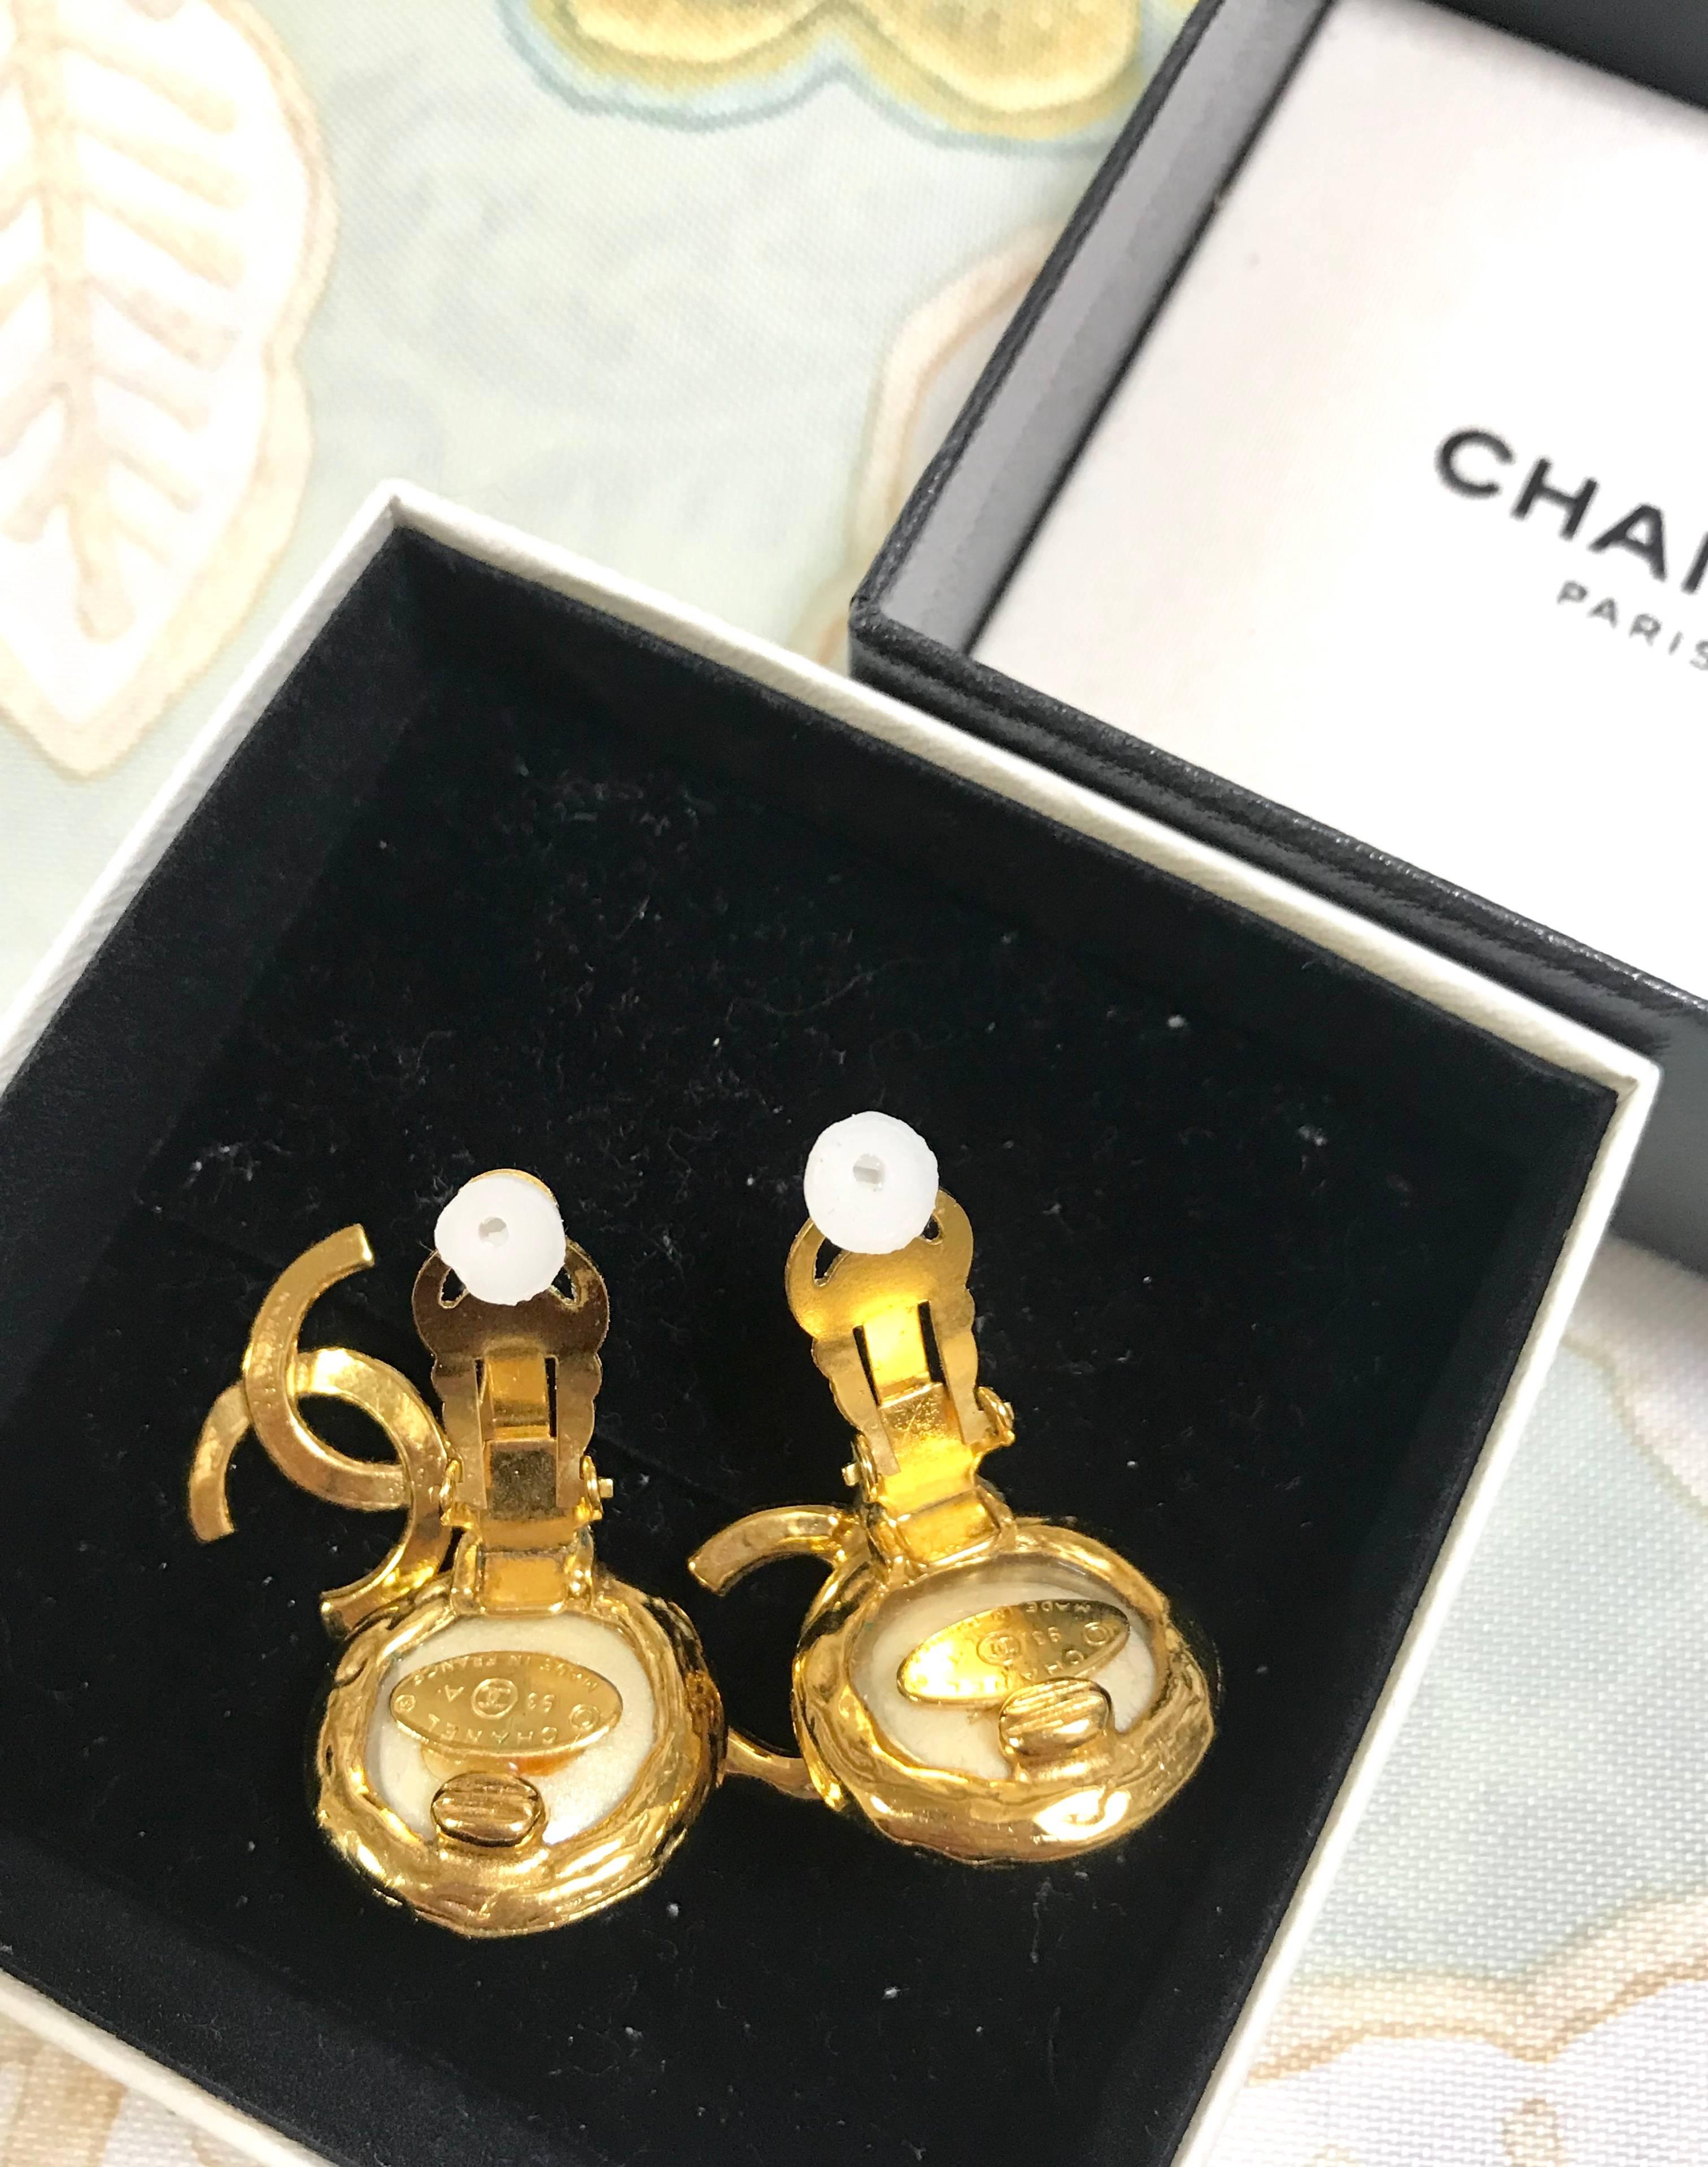 1990s. Vintage CHANEL classic round white faux pearl and golden CC dangling earrings. Iconic CC mark. Hot gift.

Introducing another classic  vintage CHANEL jewelry,  white faux pearl earrings with golden CC marks that dangle as you move!
 
Wearing